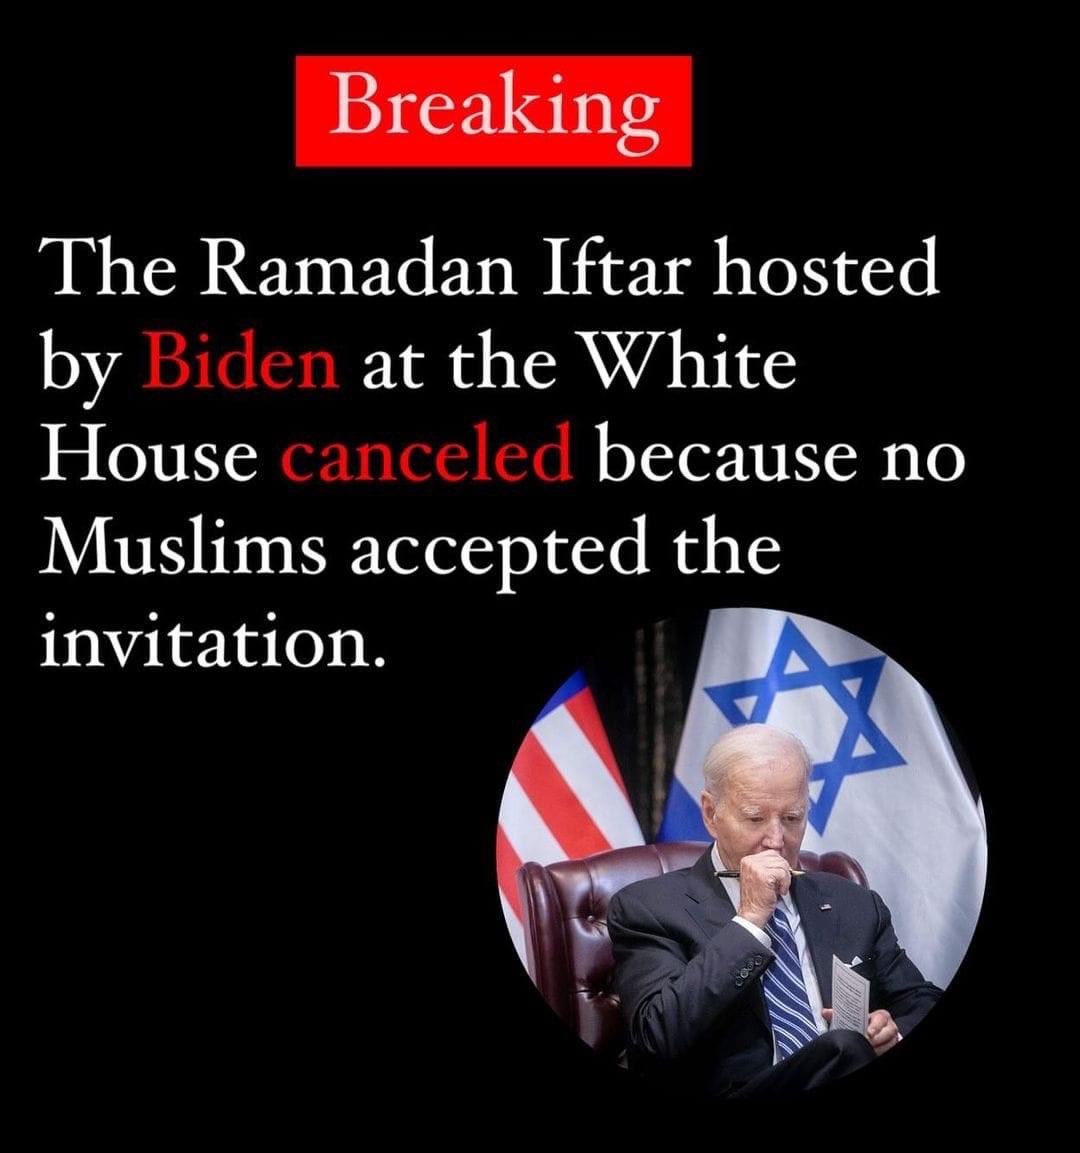 #Muslim leaders reject chance to break bread with #Biden as anger over #Gaza festers. Given recent horrors coming out of #ShifaHospital and the attack against the #wckitchen convoy, and so much more, we need the White House to take our asks seriously. This nightmare needs to end